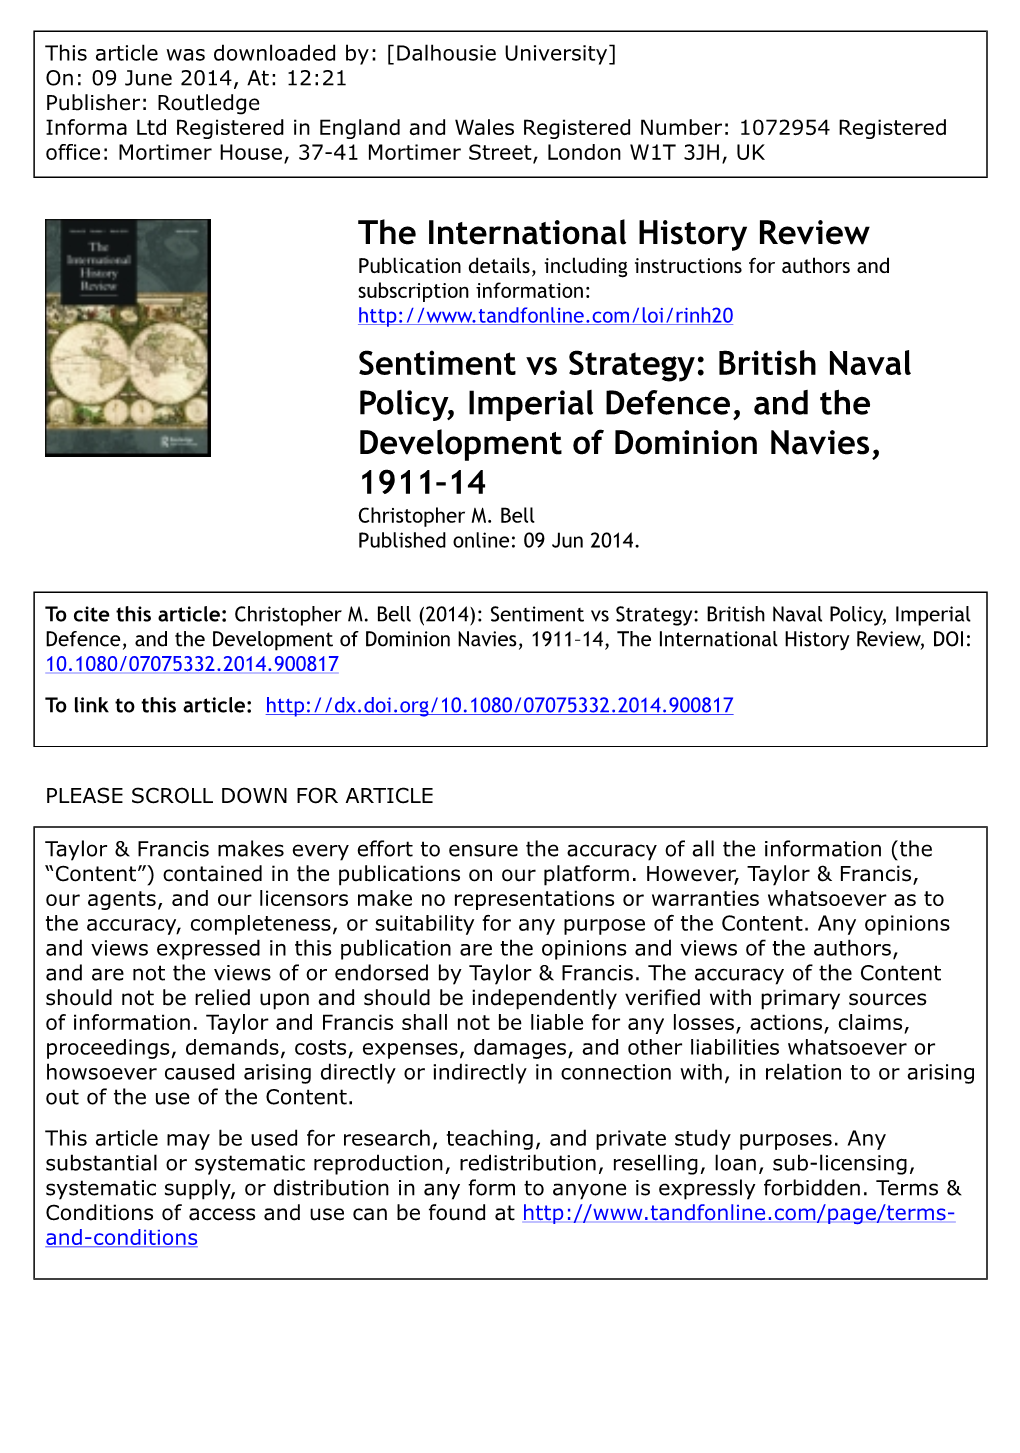 Sentiment Vs Strategy: British Naval Policy, Imperial Defence, and the Development of Dominion Navies, 1911–14 Christopher M